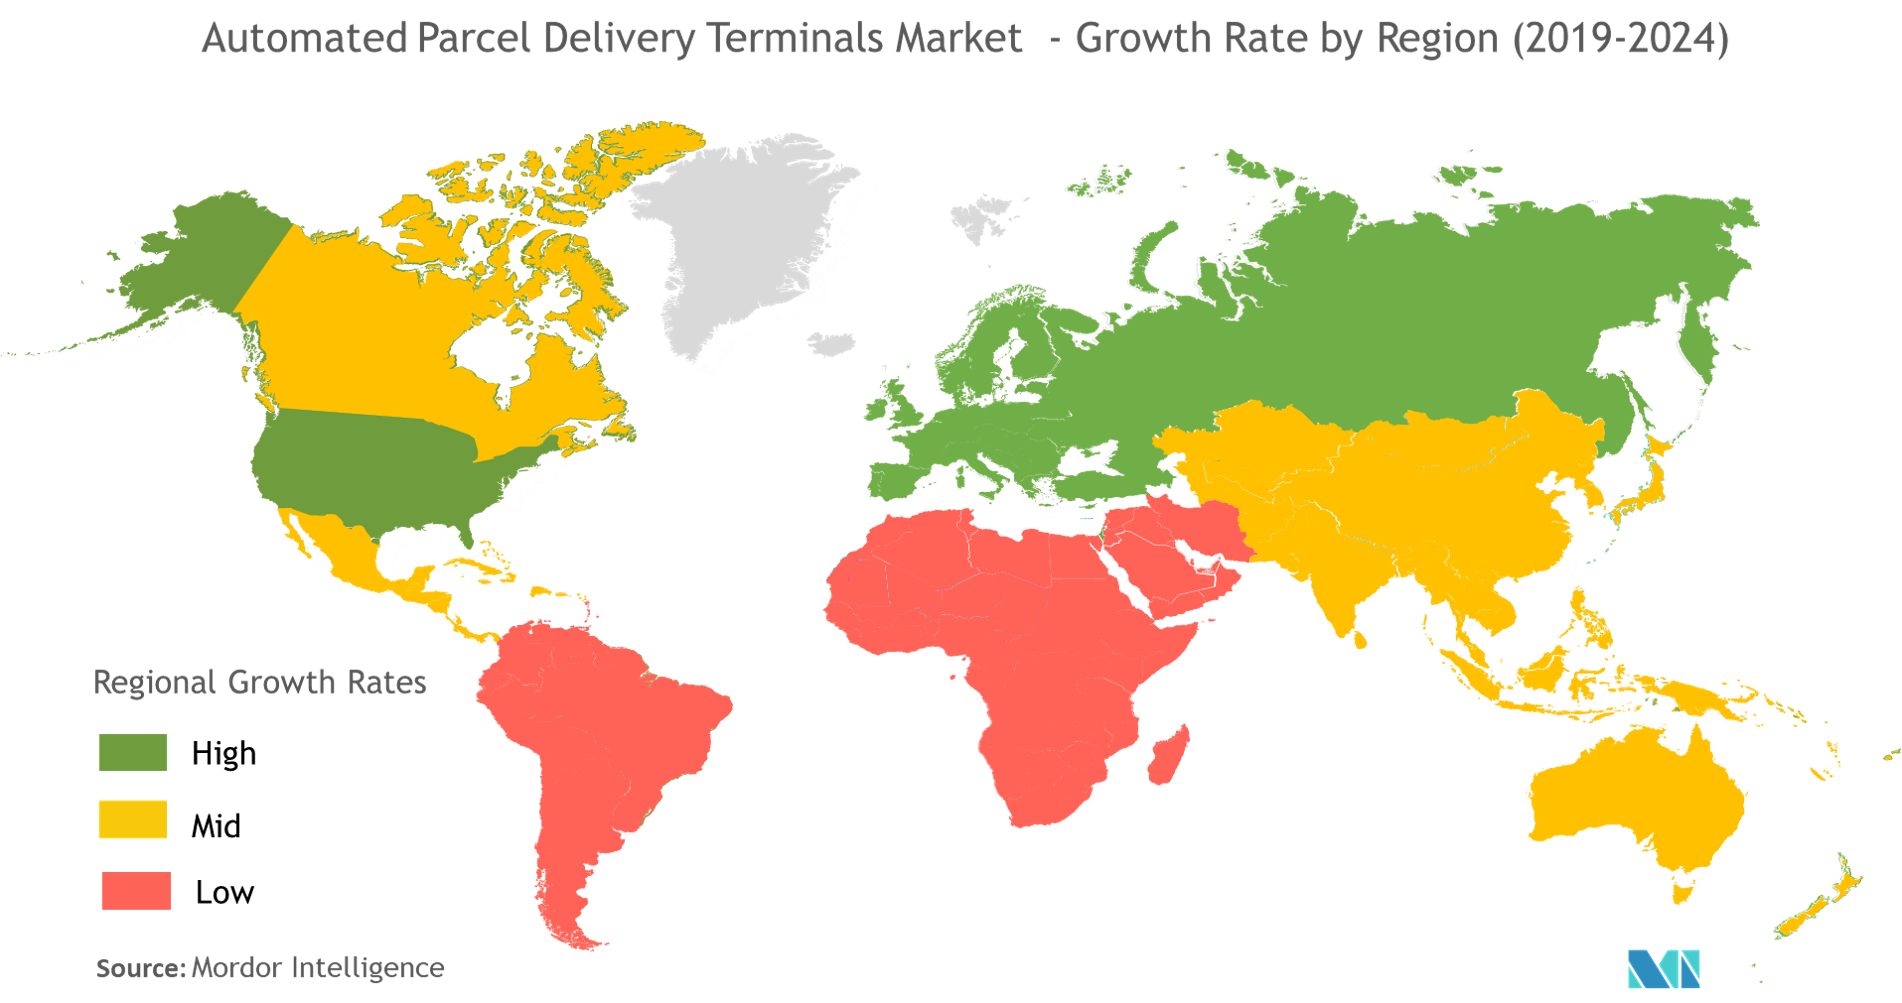 Automated Parcel Delivery Terminals Market Analysis